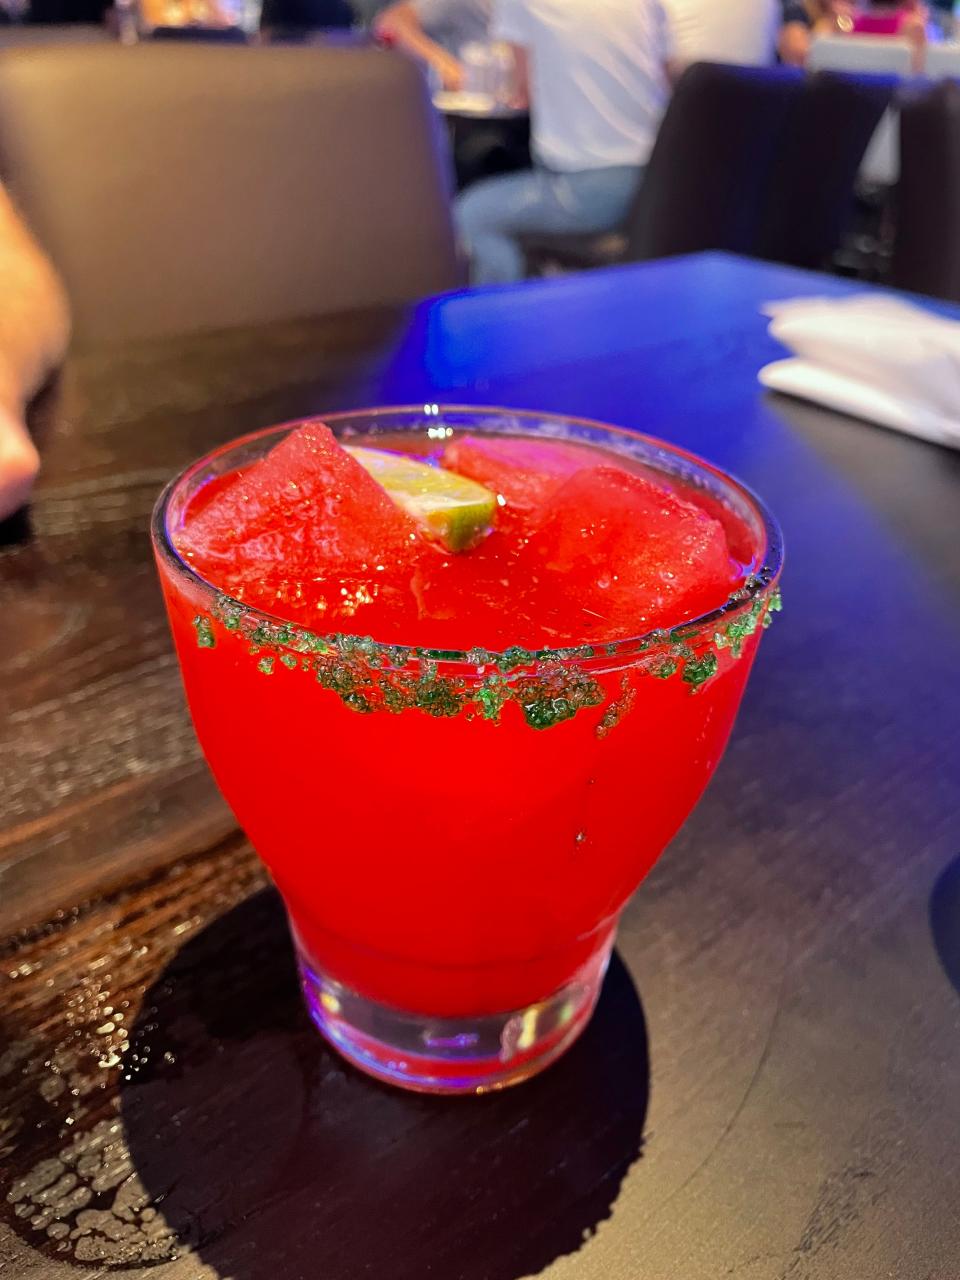 The strawberry watermelon margarita at Dave & Buster's.